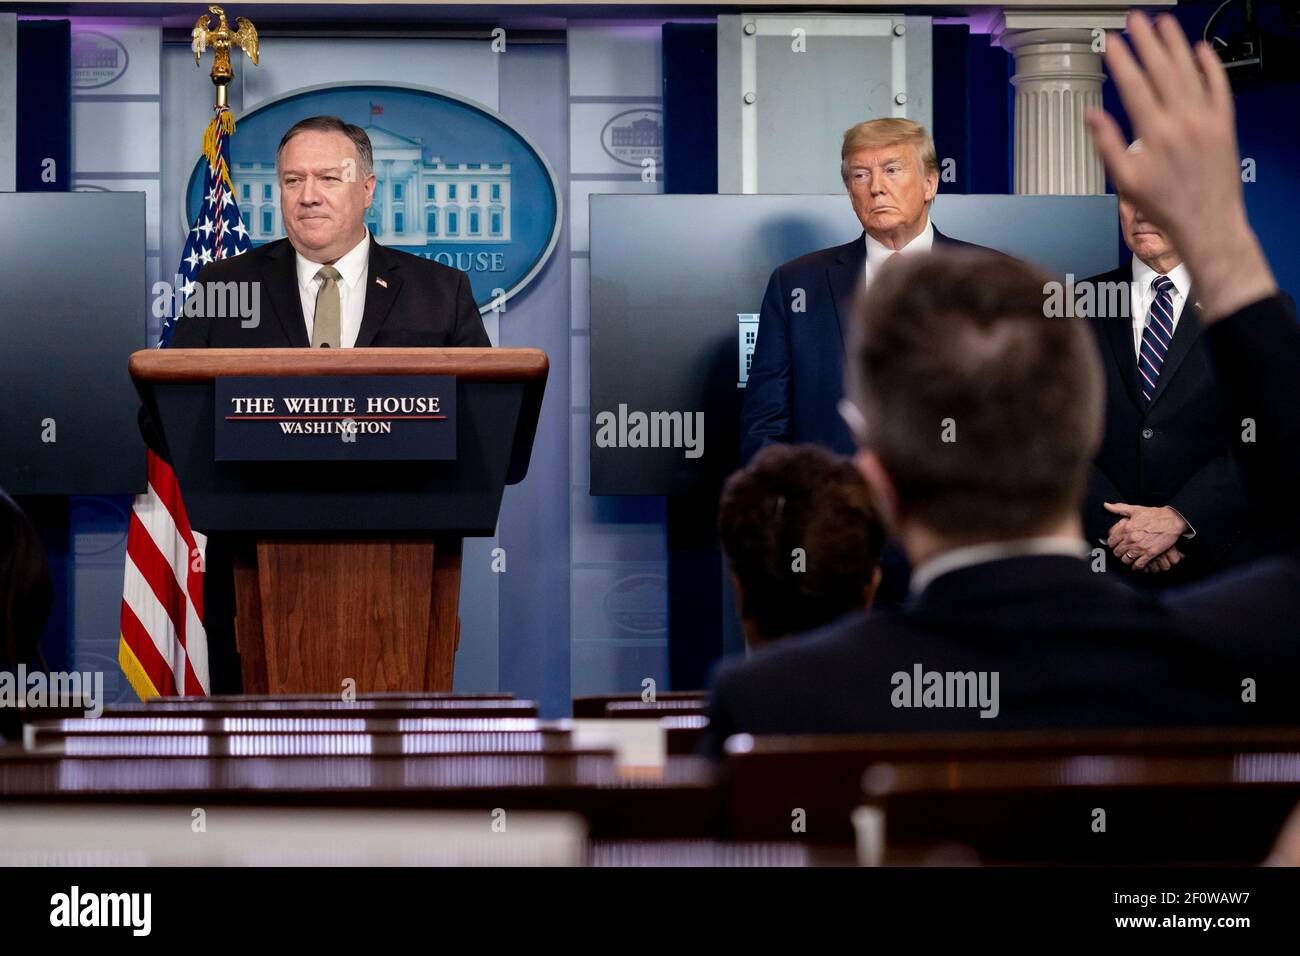 President Donald Trump and Vice President Mike Pence listen as Secretary of State Mike Pompeo announces that since January the State Department has brought back some 50000 Americans stranded overseas due to the coronavirus outbreak during the coronavirus update briefing Wednesday April 8 2020 in the James S. Brady Press Briefing Room of the White House. Stock Photo